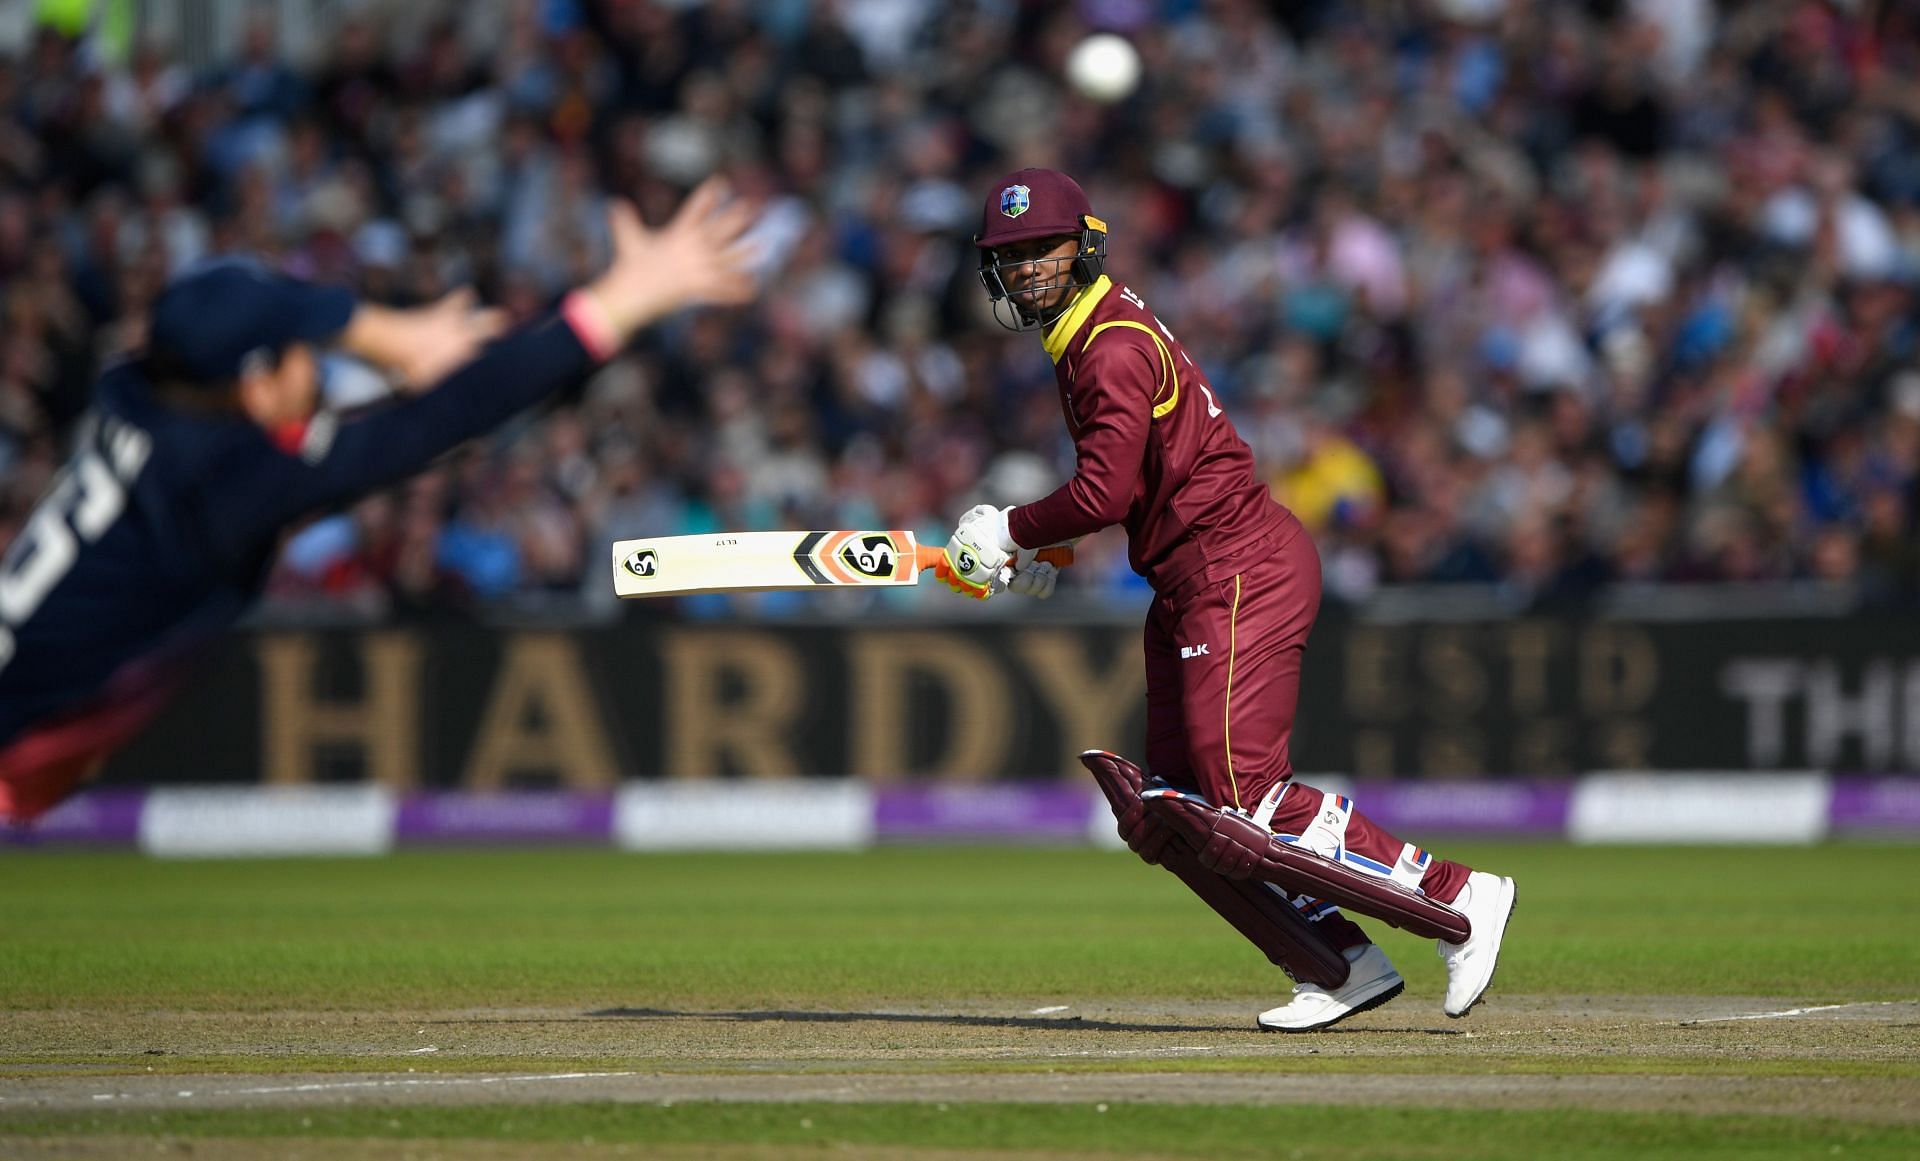 England v West Indies - 1st Royal London One Day International (Image: Getty)